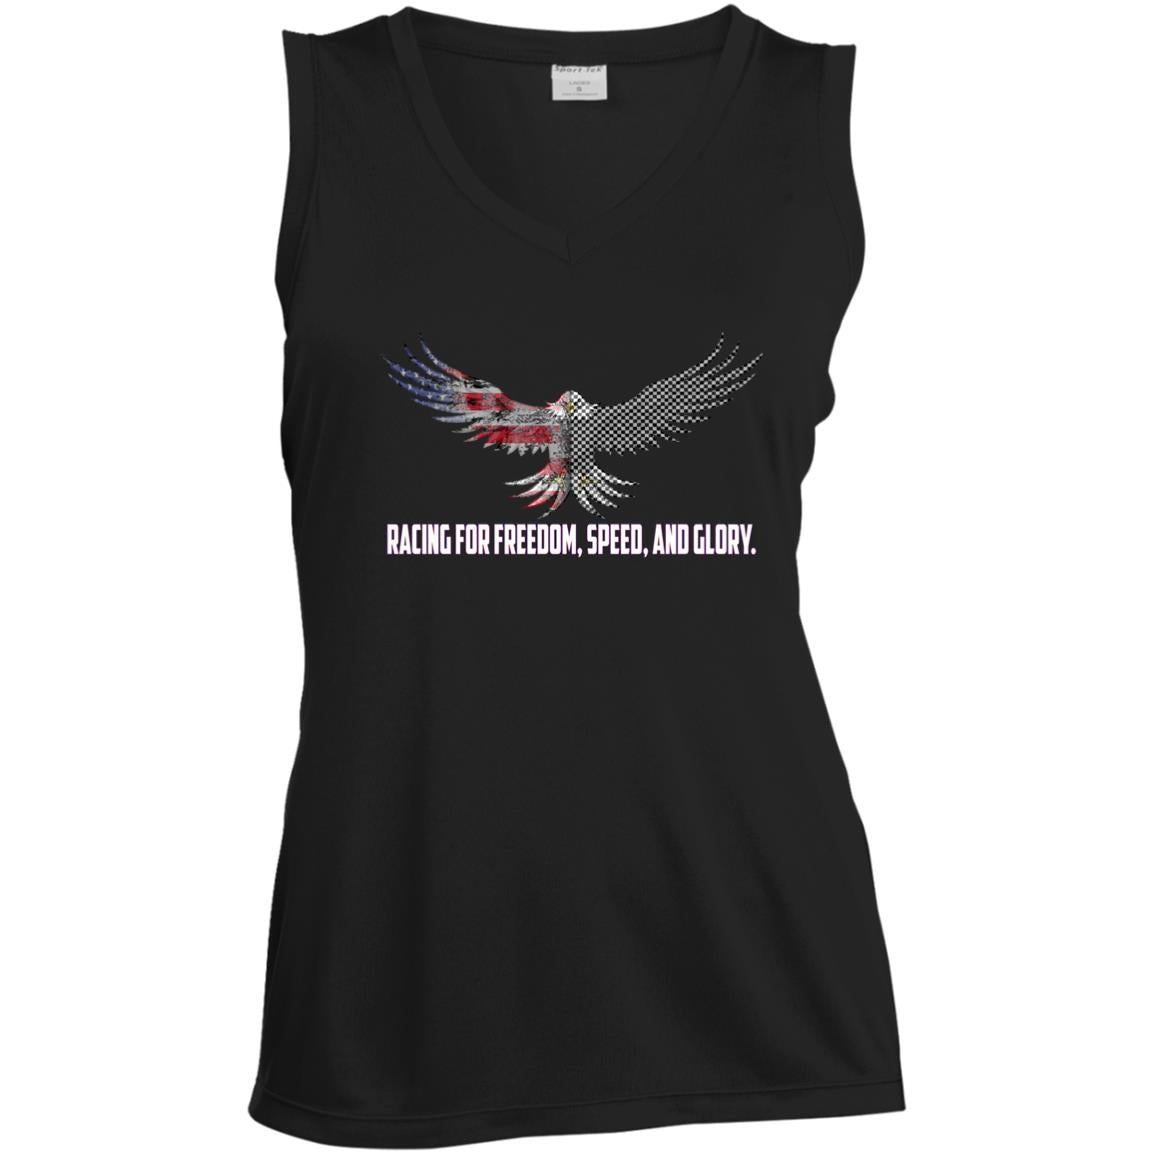 Racing For Freedom, Speed, And Glory Ladies' Sleeveless V-Neck Performance Tee